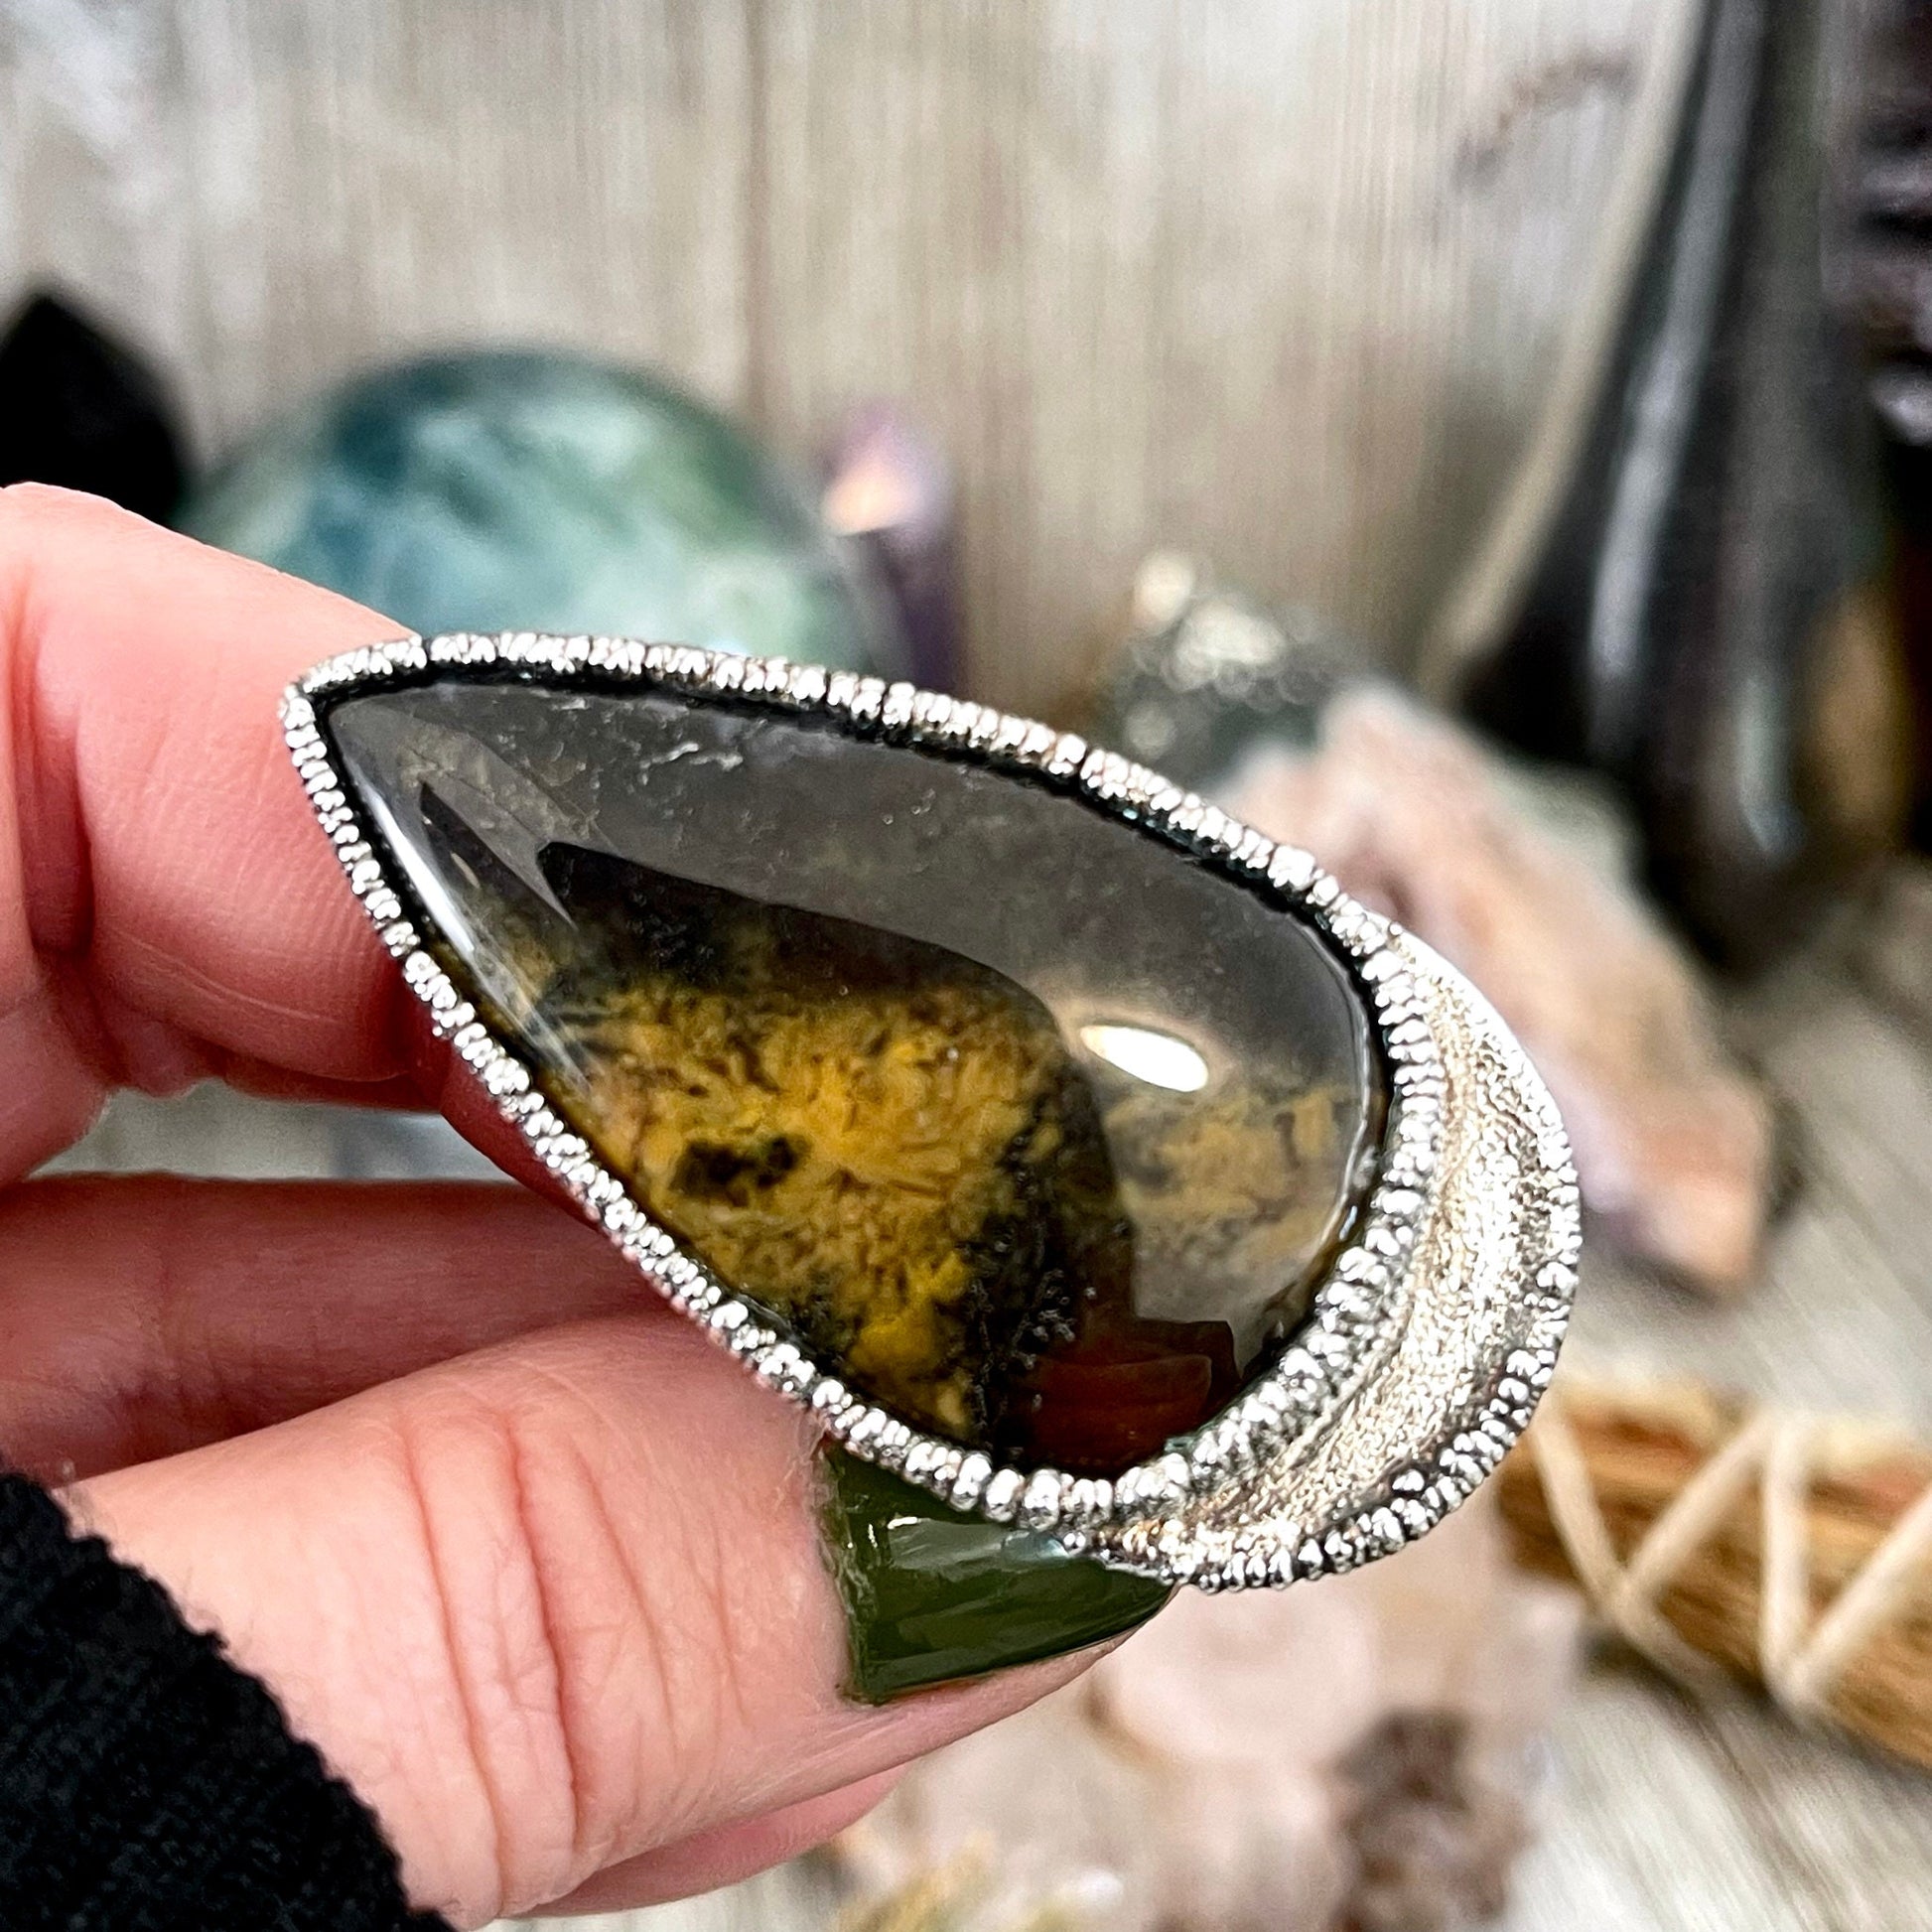 Big Bold Jewelry, Big Crystal Ring, Big Silver Ring, Big Statement Ring, Big Stone Ring, Bohemian Jewelry, Etsy ID: 1659943399, FOXLARK- RINGS, Jewelry, Large Crystal Ring, Natural stone ring, Rings, Sage amethyst ring, silver crystal ring, Silver Jewelry